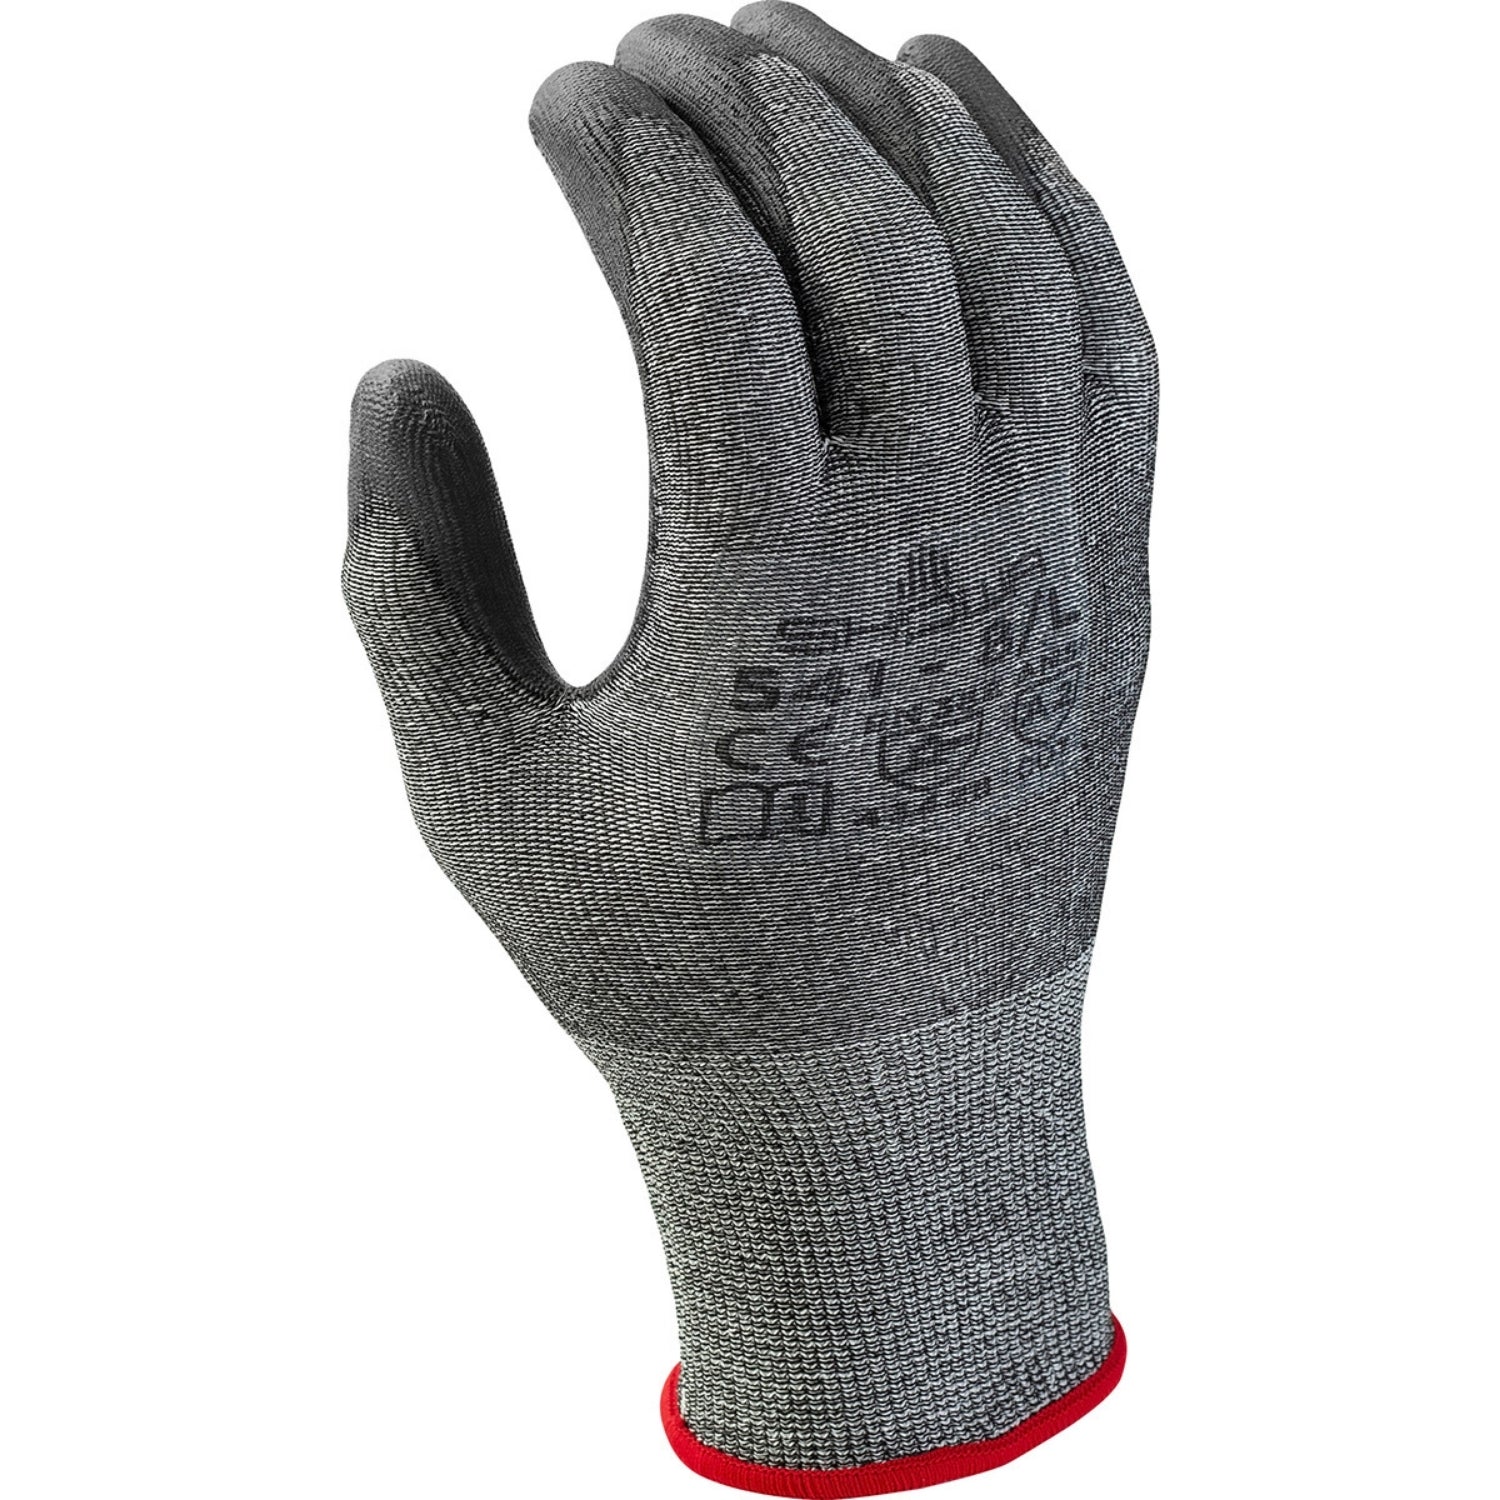 SHOWA 541 - Cut Resistant Gloves 3 Pack